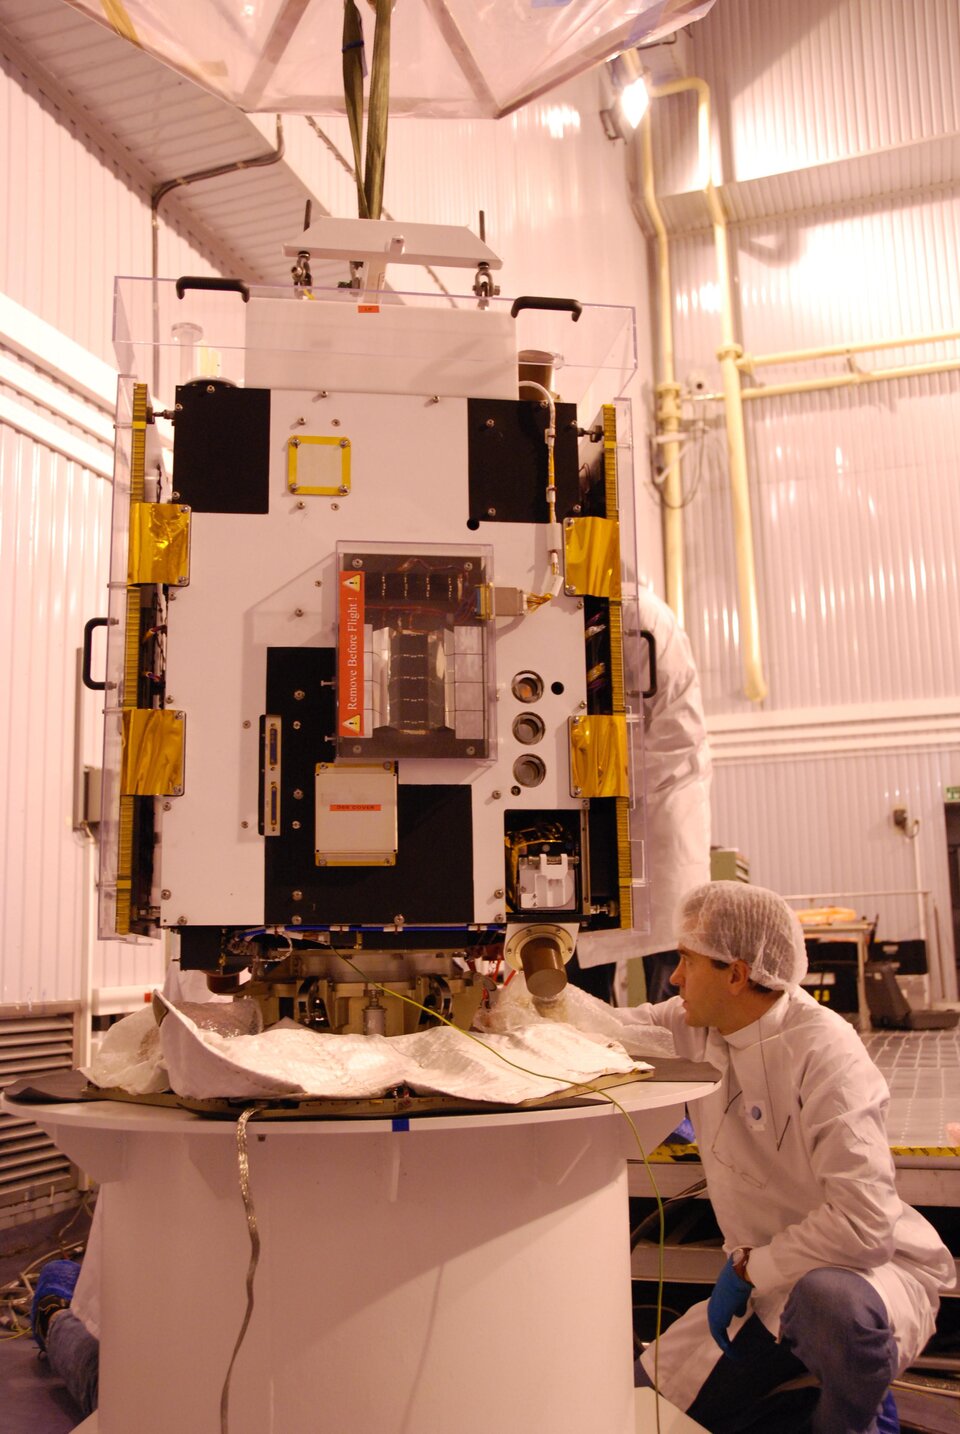 Proba-2 mated onto its Adapter System